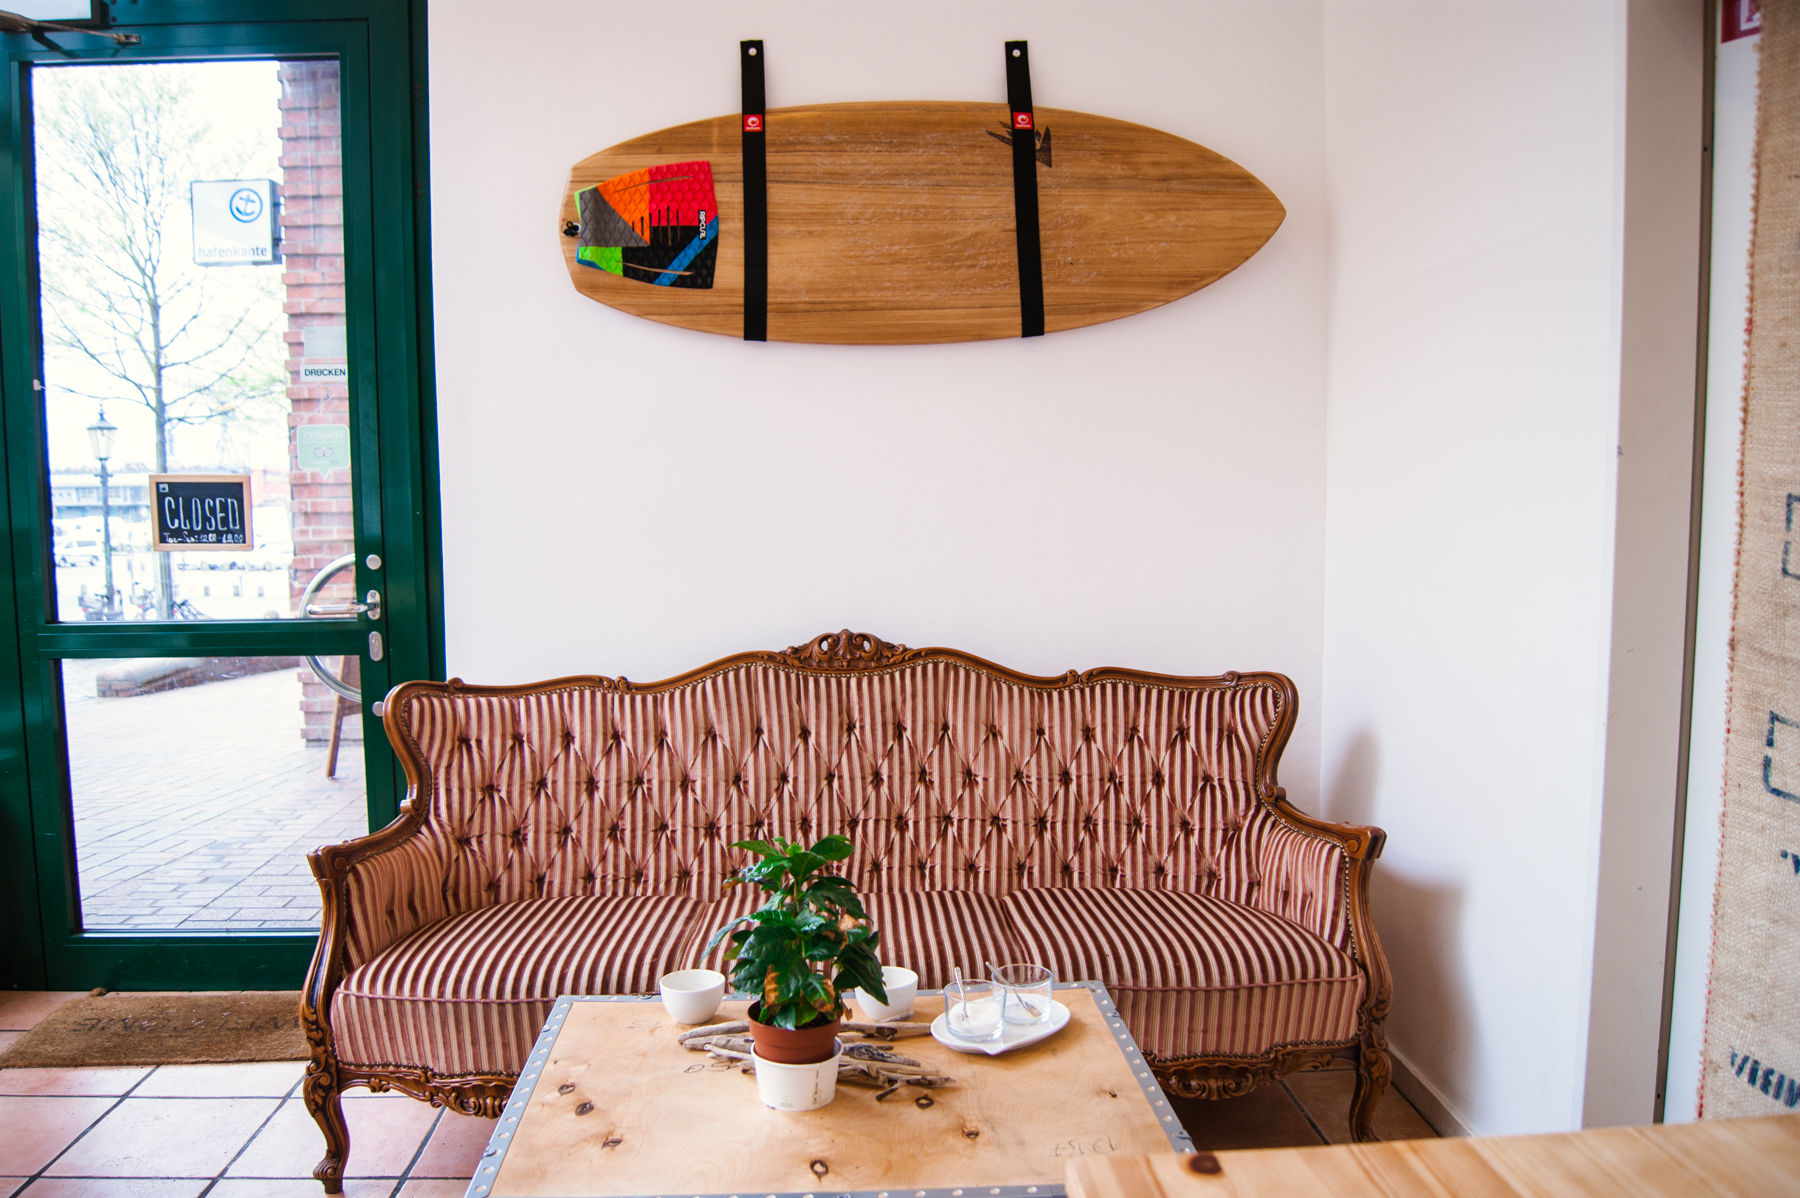 The decoration is an organic, vintage and surfer vibe mix